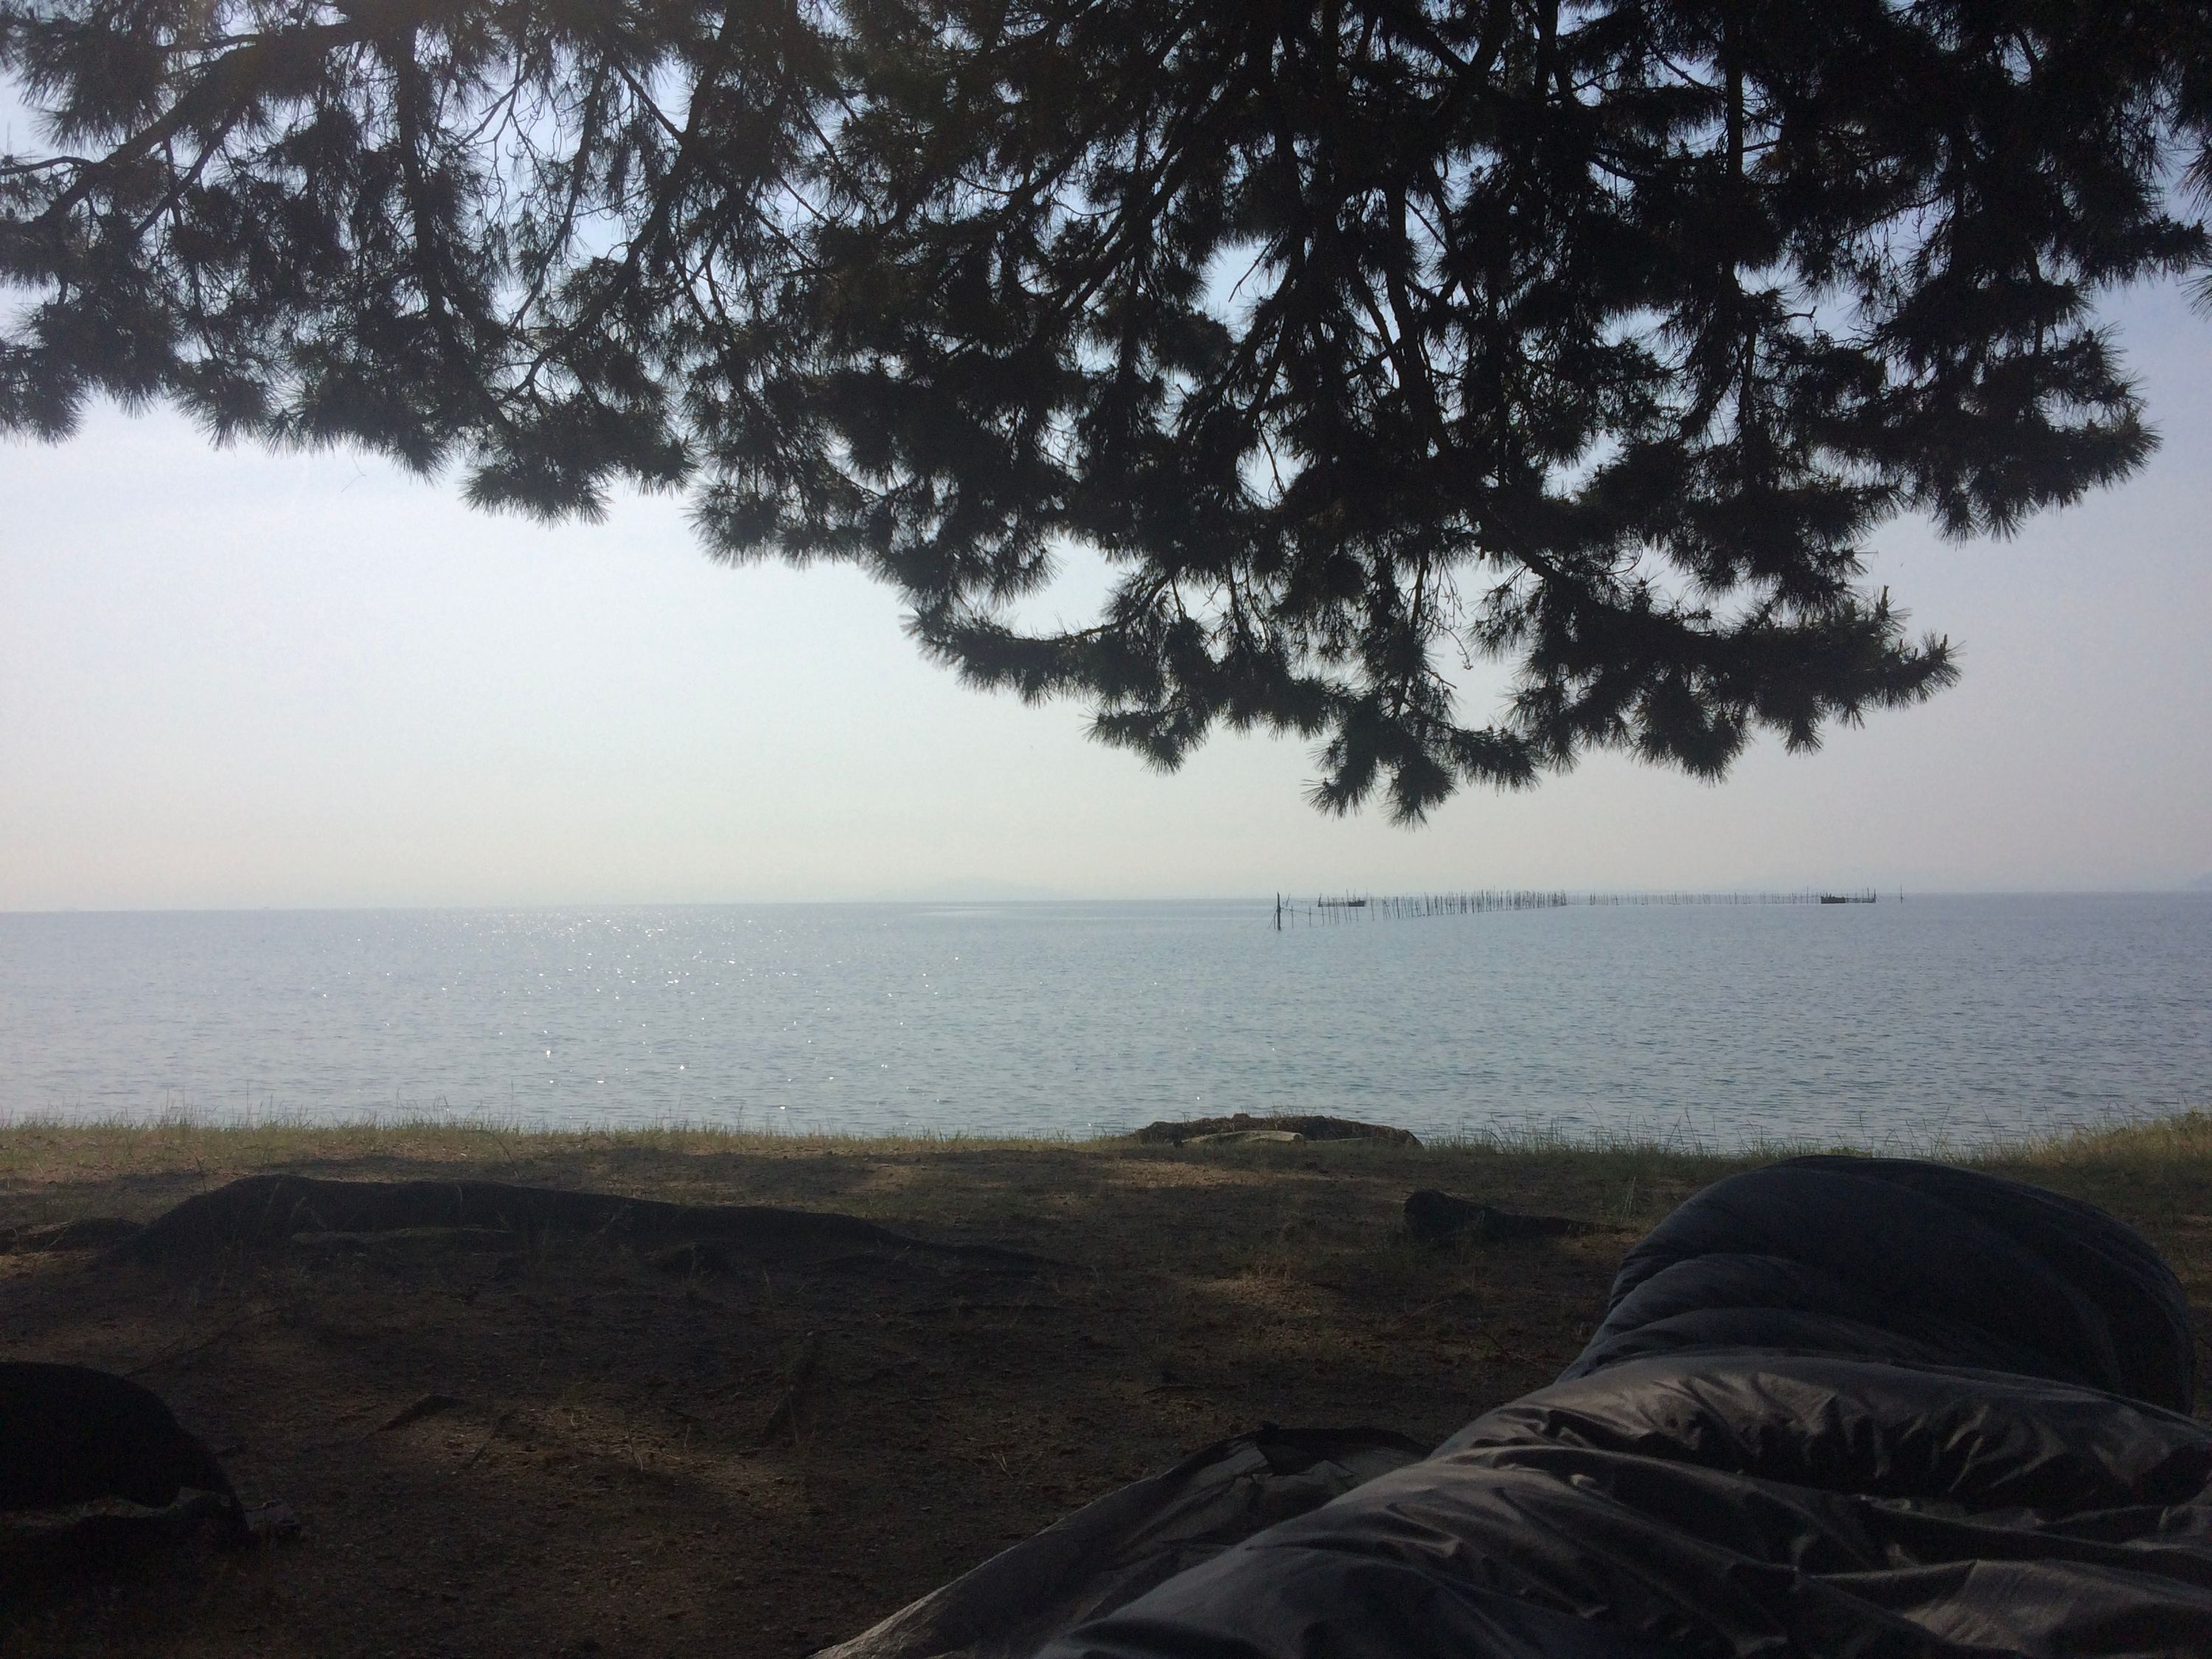 The branches of a pine tree overhang a view on a lake with the foot of a sleeping bag visible in the lower right corner, implying a photo taken immediately after waking up on a beach.